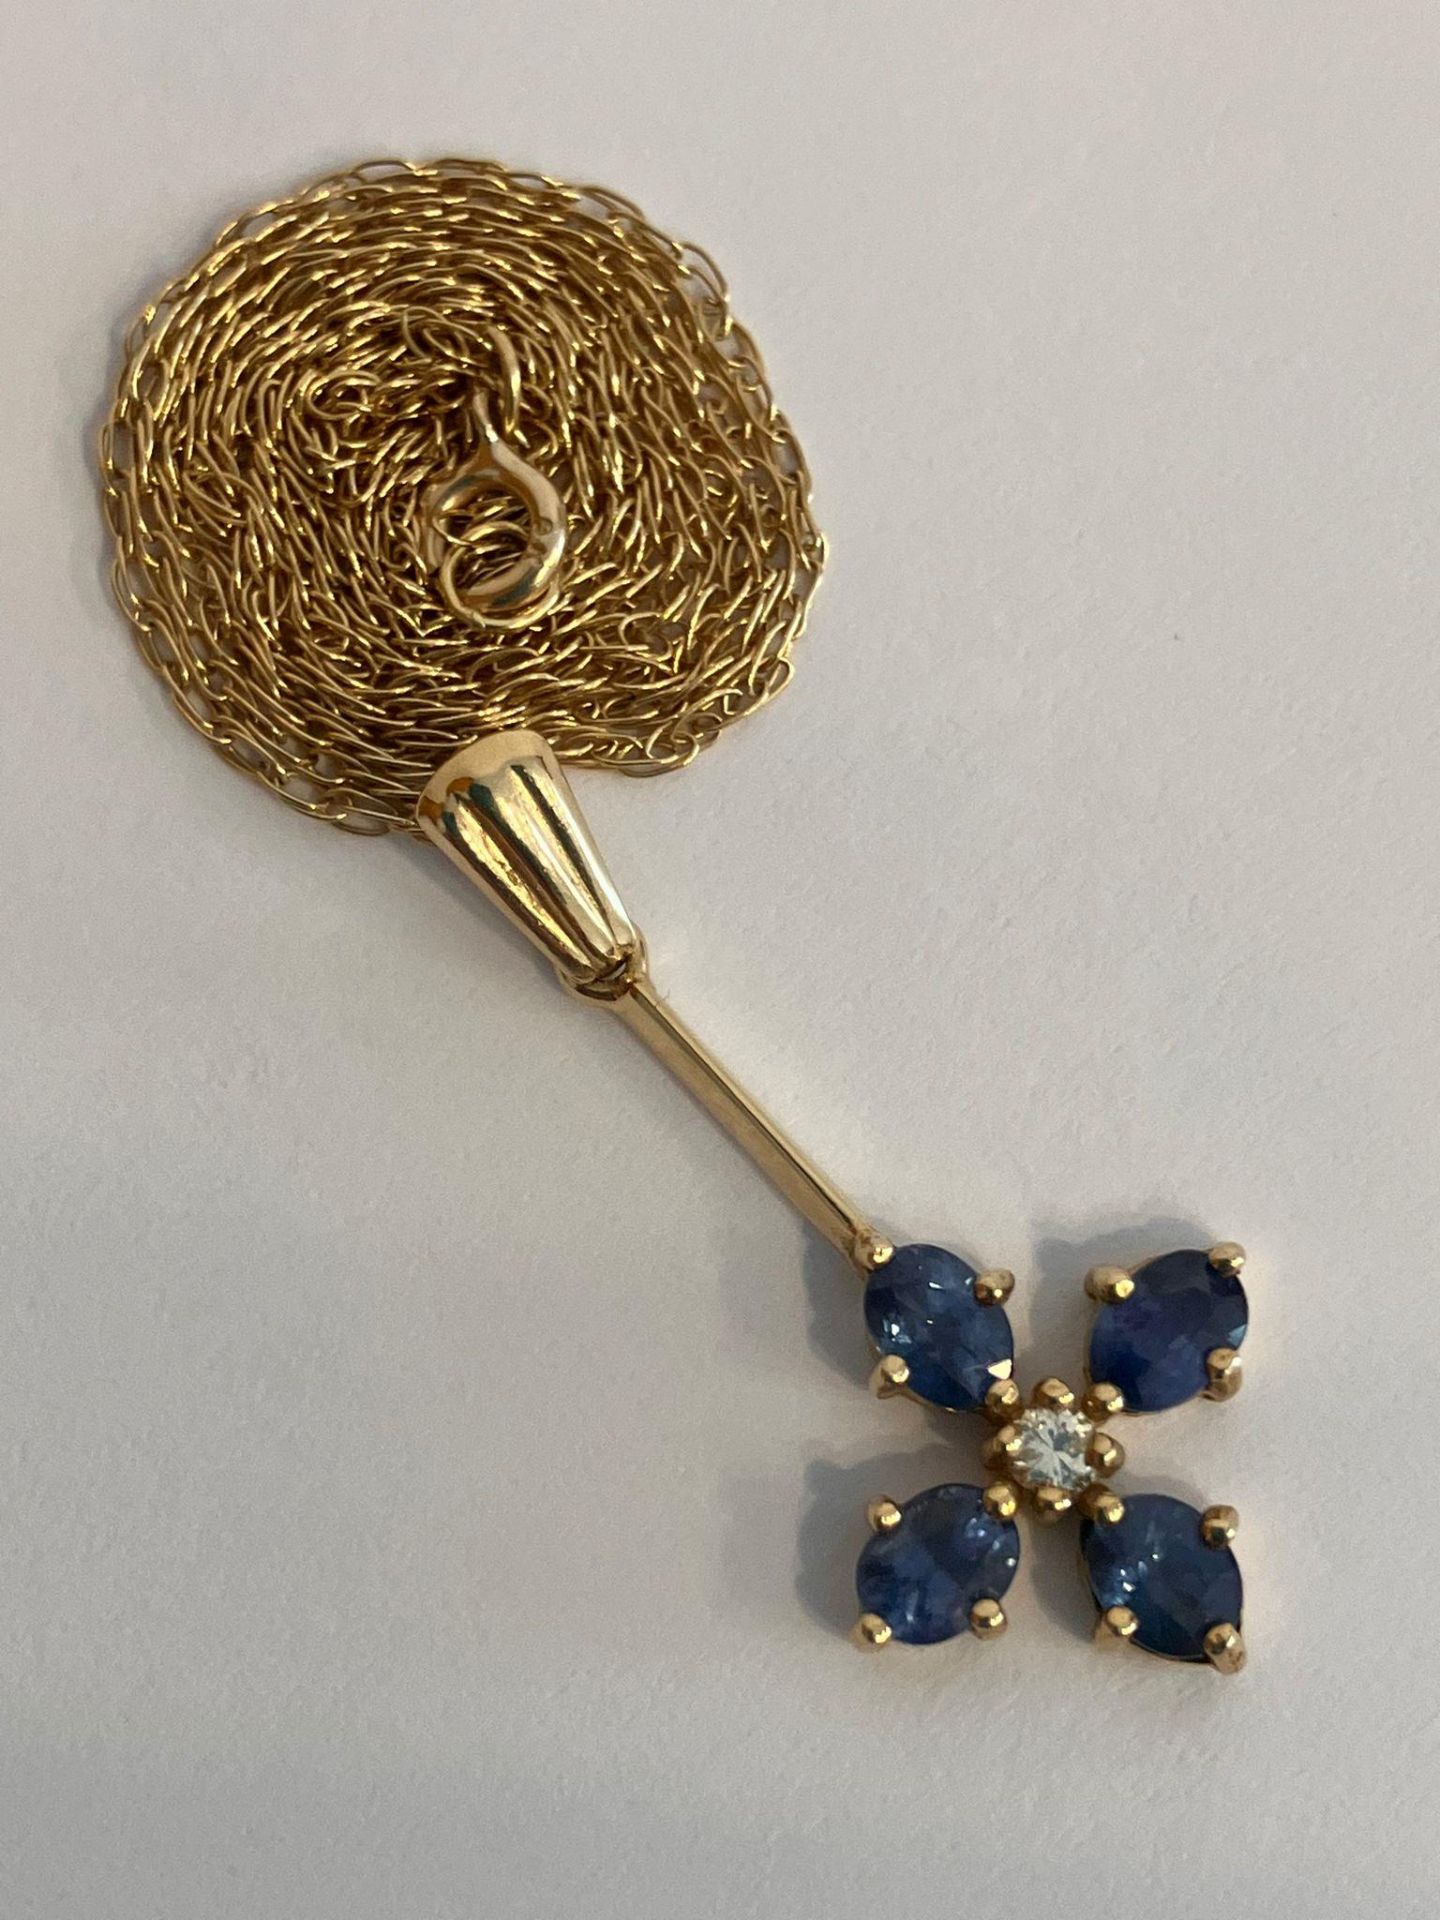 9 carat GOLD DIAMOND and SAPPHIRE PENDANT with 9 carat GOLD Chain. Pendant 2.75 Grams. Gold Chain 46 - Bild 3 aus 3